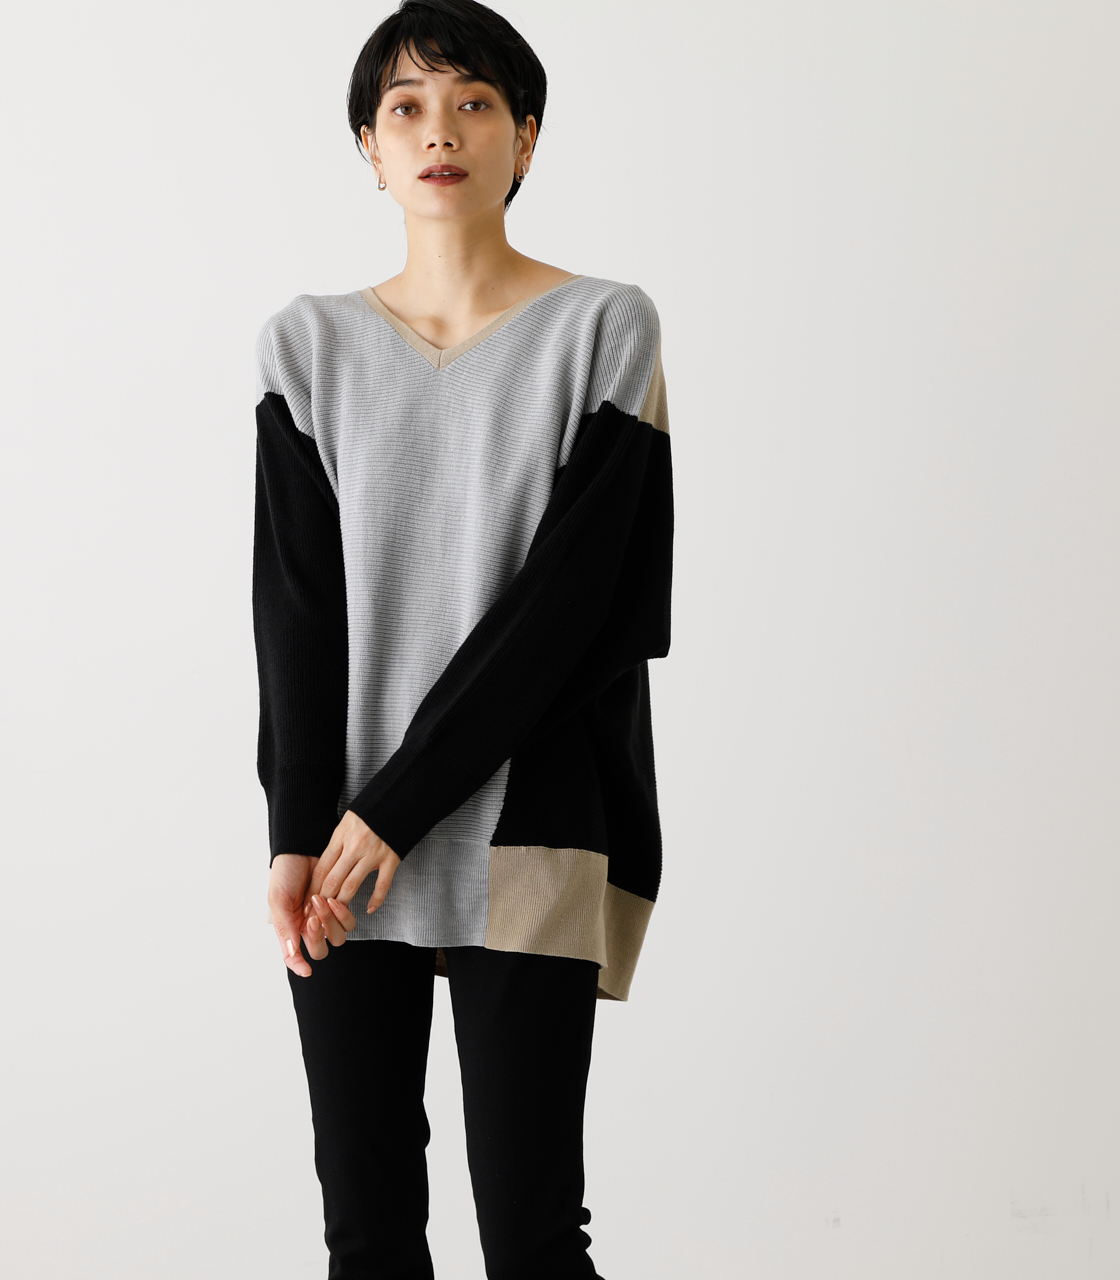 NUDIE DOLMAN KNIT TOPS/ヌーディードルマンニットトップス 詳細画像 柄GRY 1